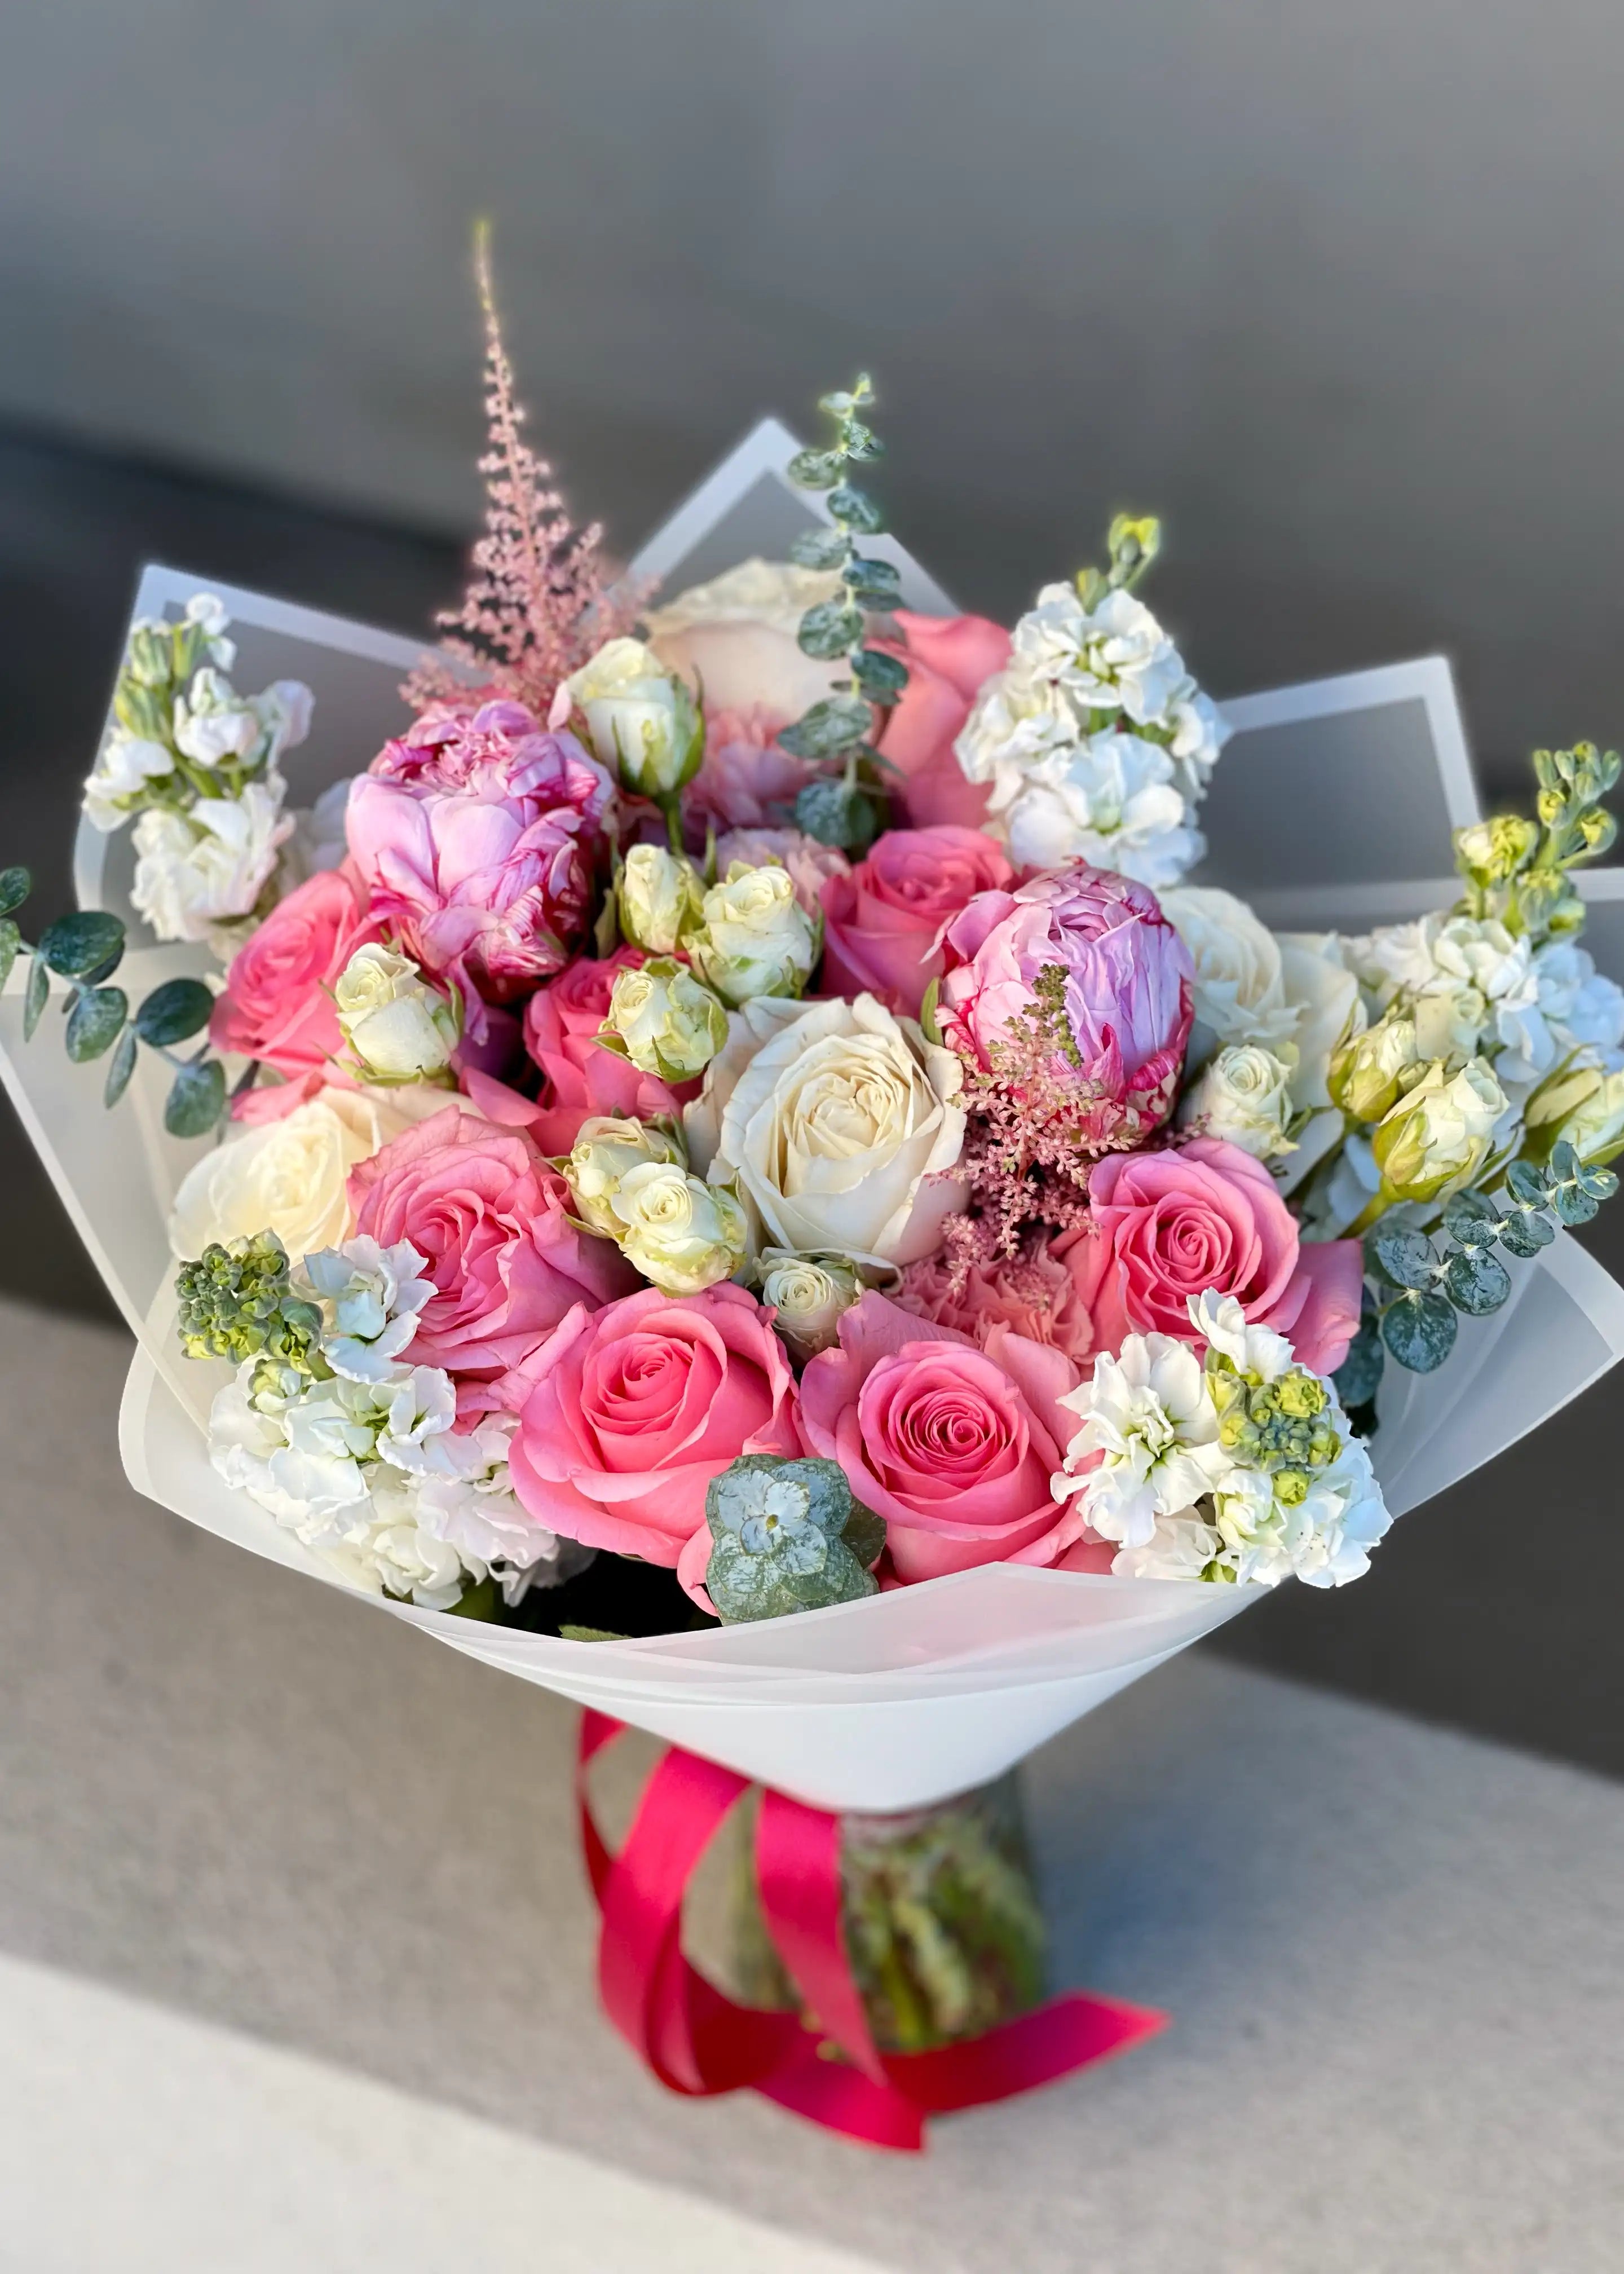 NO. 123. Pink Tenderness Bouquet (peonies, roses, matthiolas, astilbe)